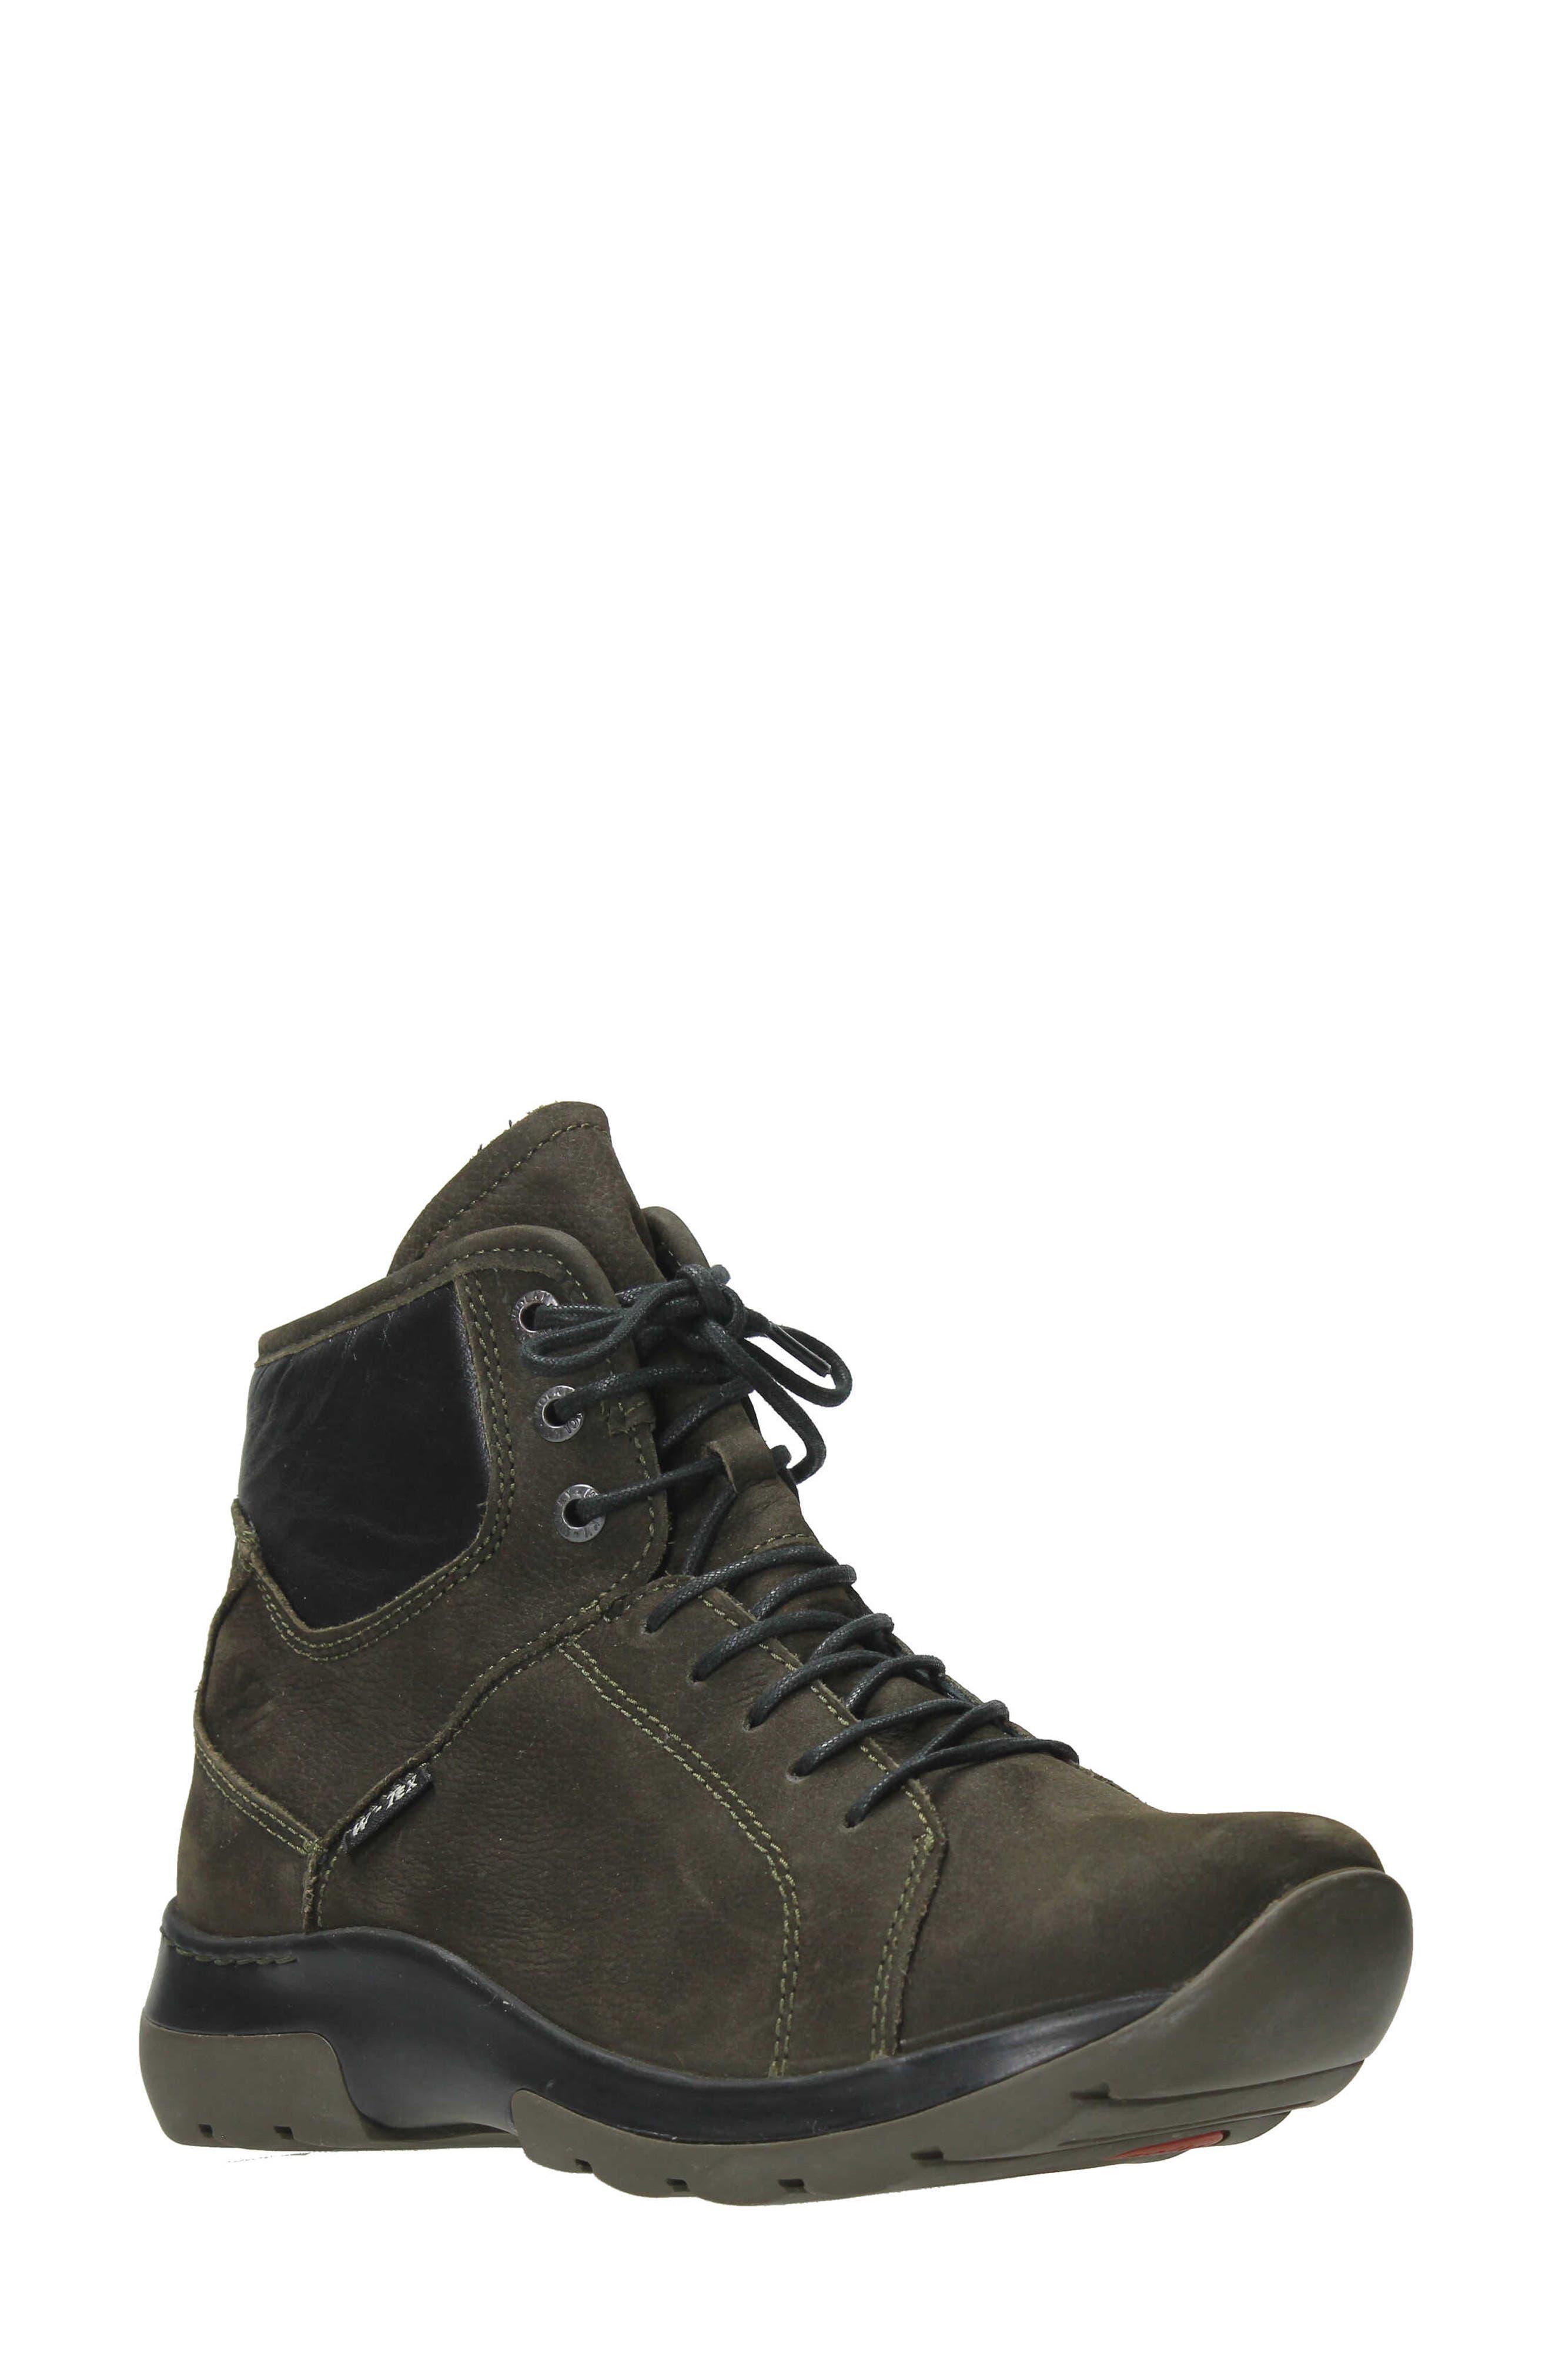 Wolky Ambient Lace-up Boot in Black | Lyst